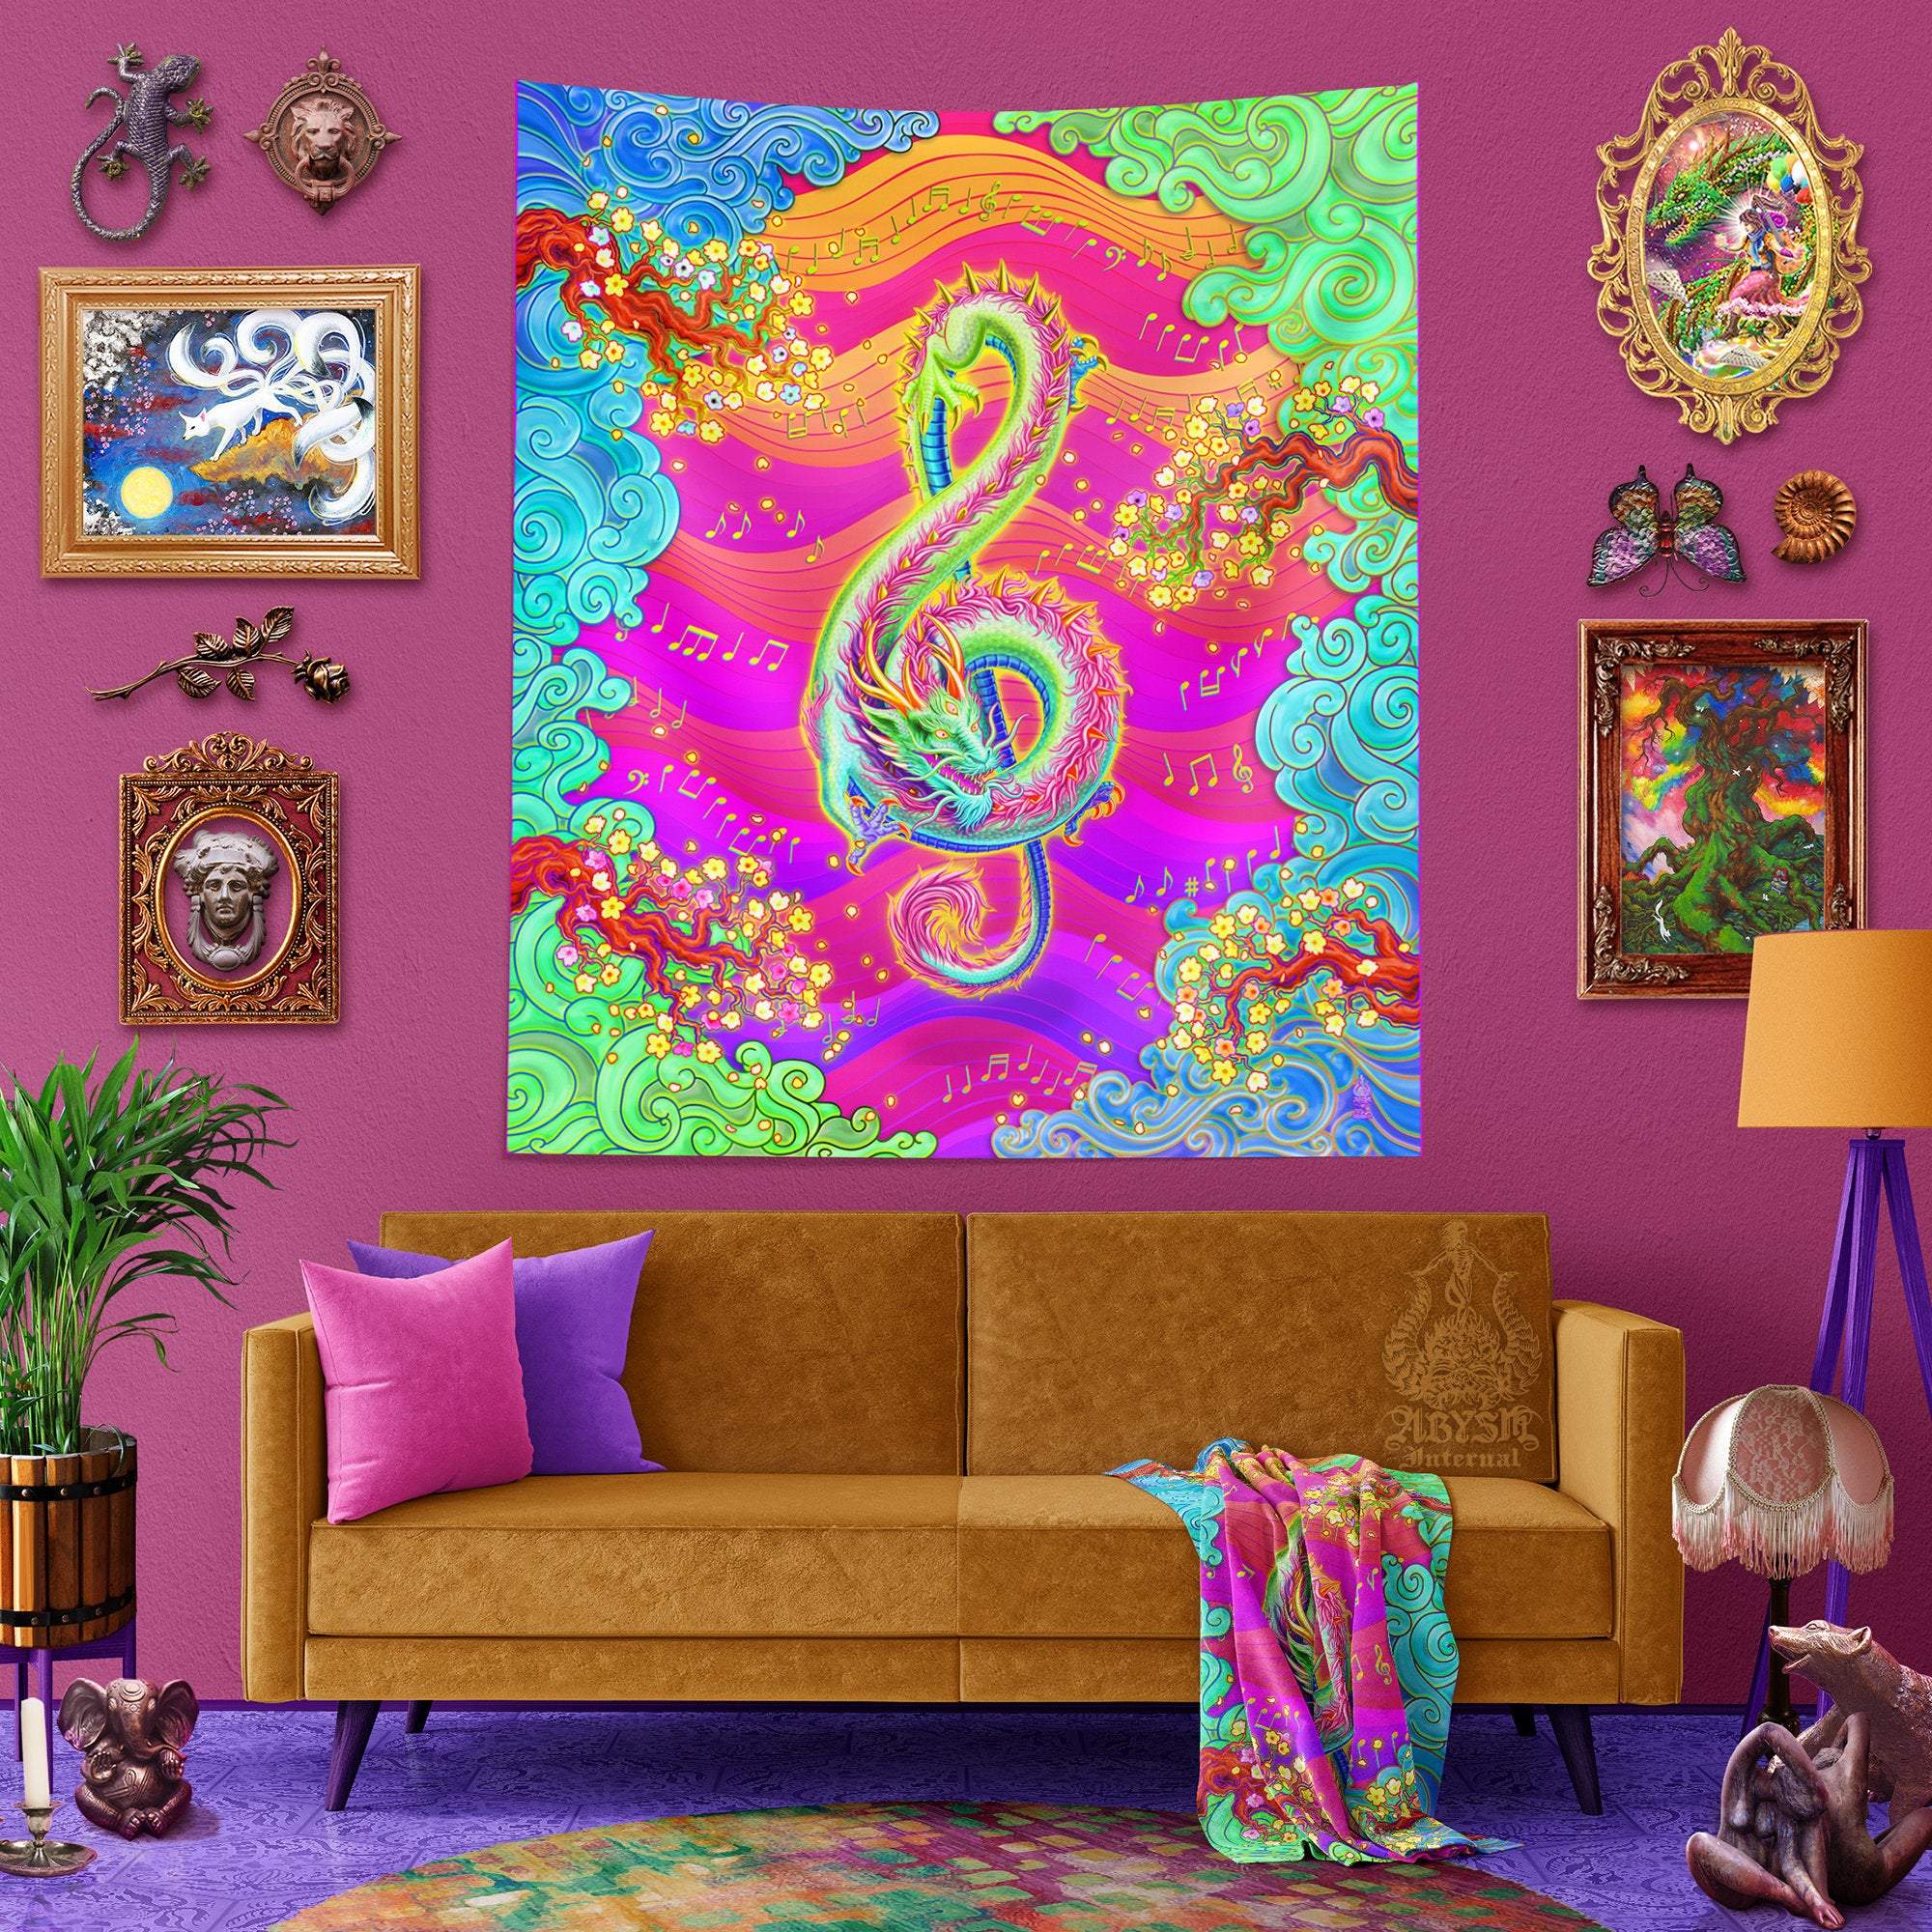 Psychedelic Tapestry, Trippy Wall Hanging, Eclectic Music Home Decor, Art Print - Kidcore, Neon Dragon, Treble Clef - Abysm Internal